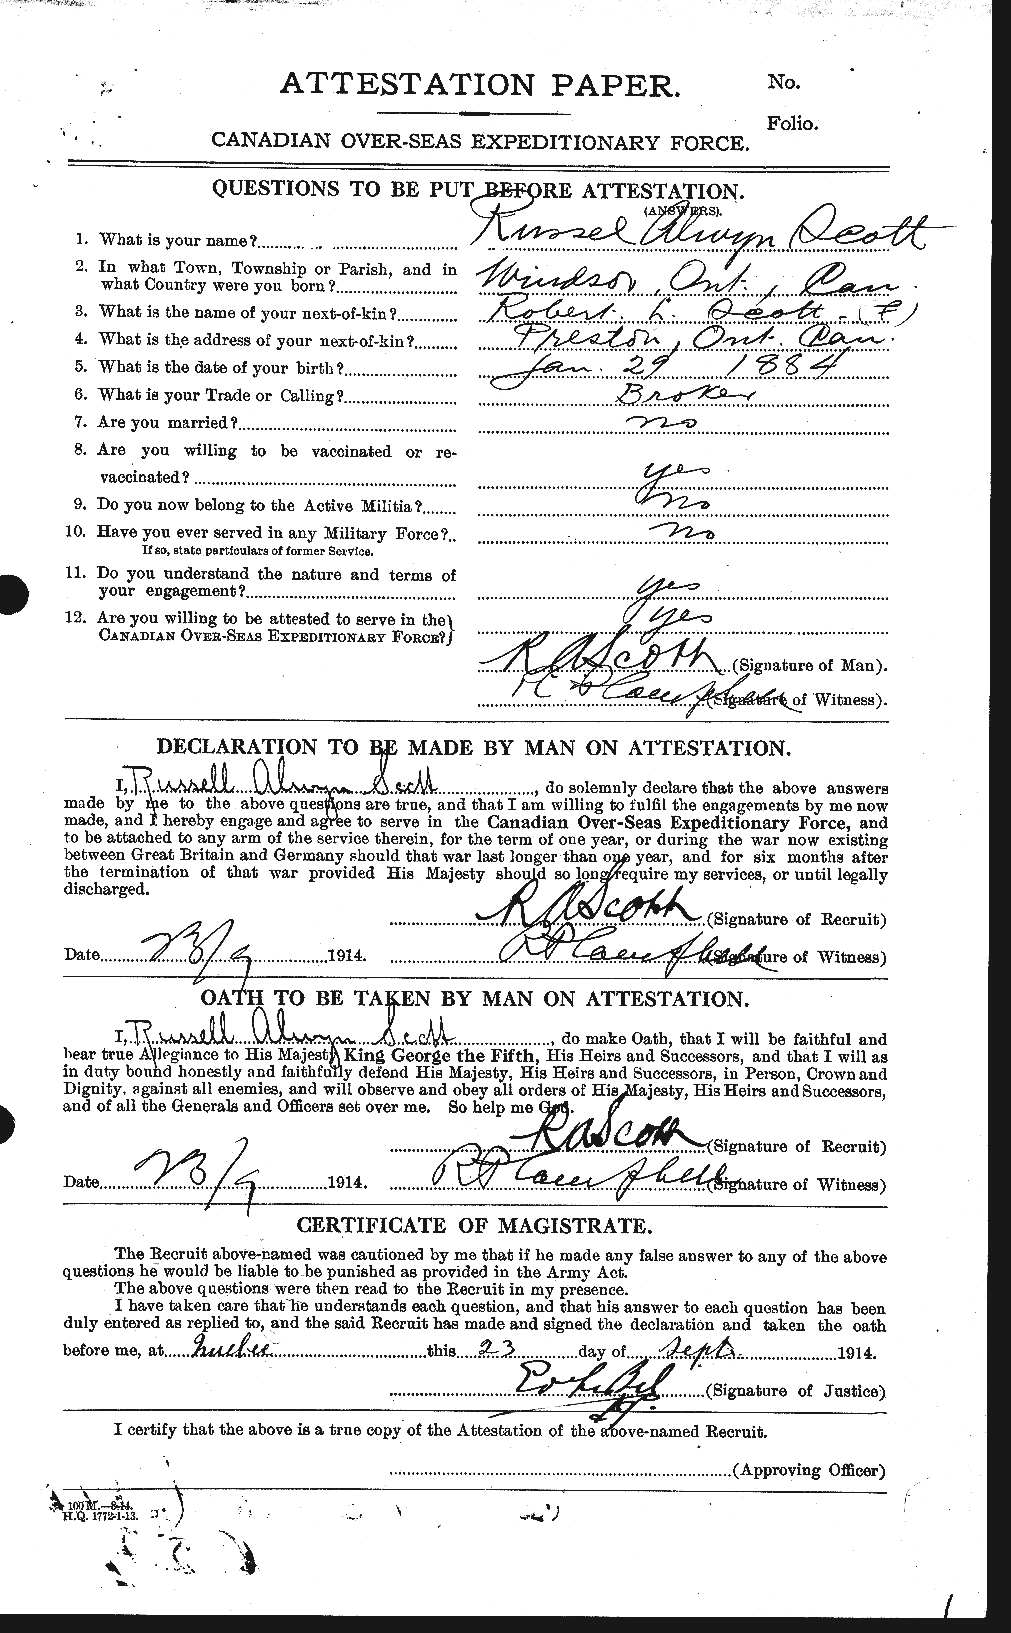 Personnel Records of the First World War - CEF 088879a